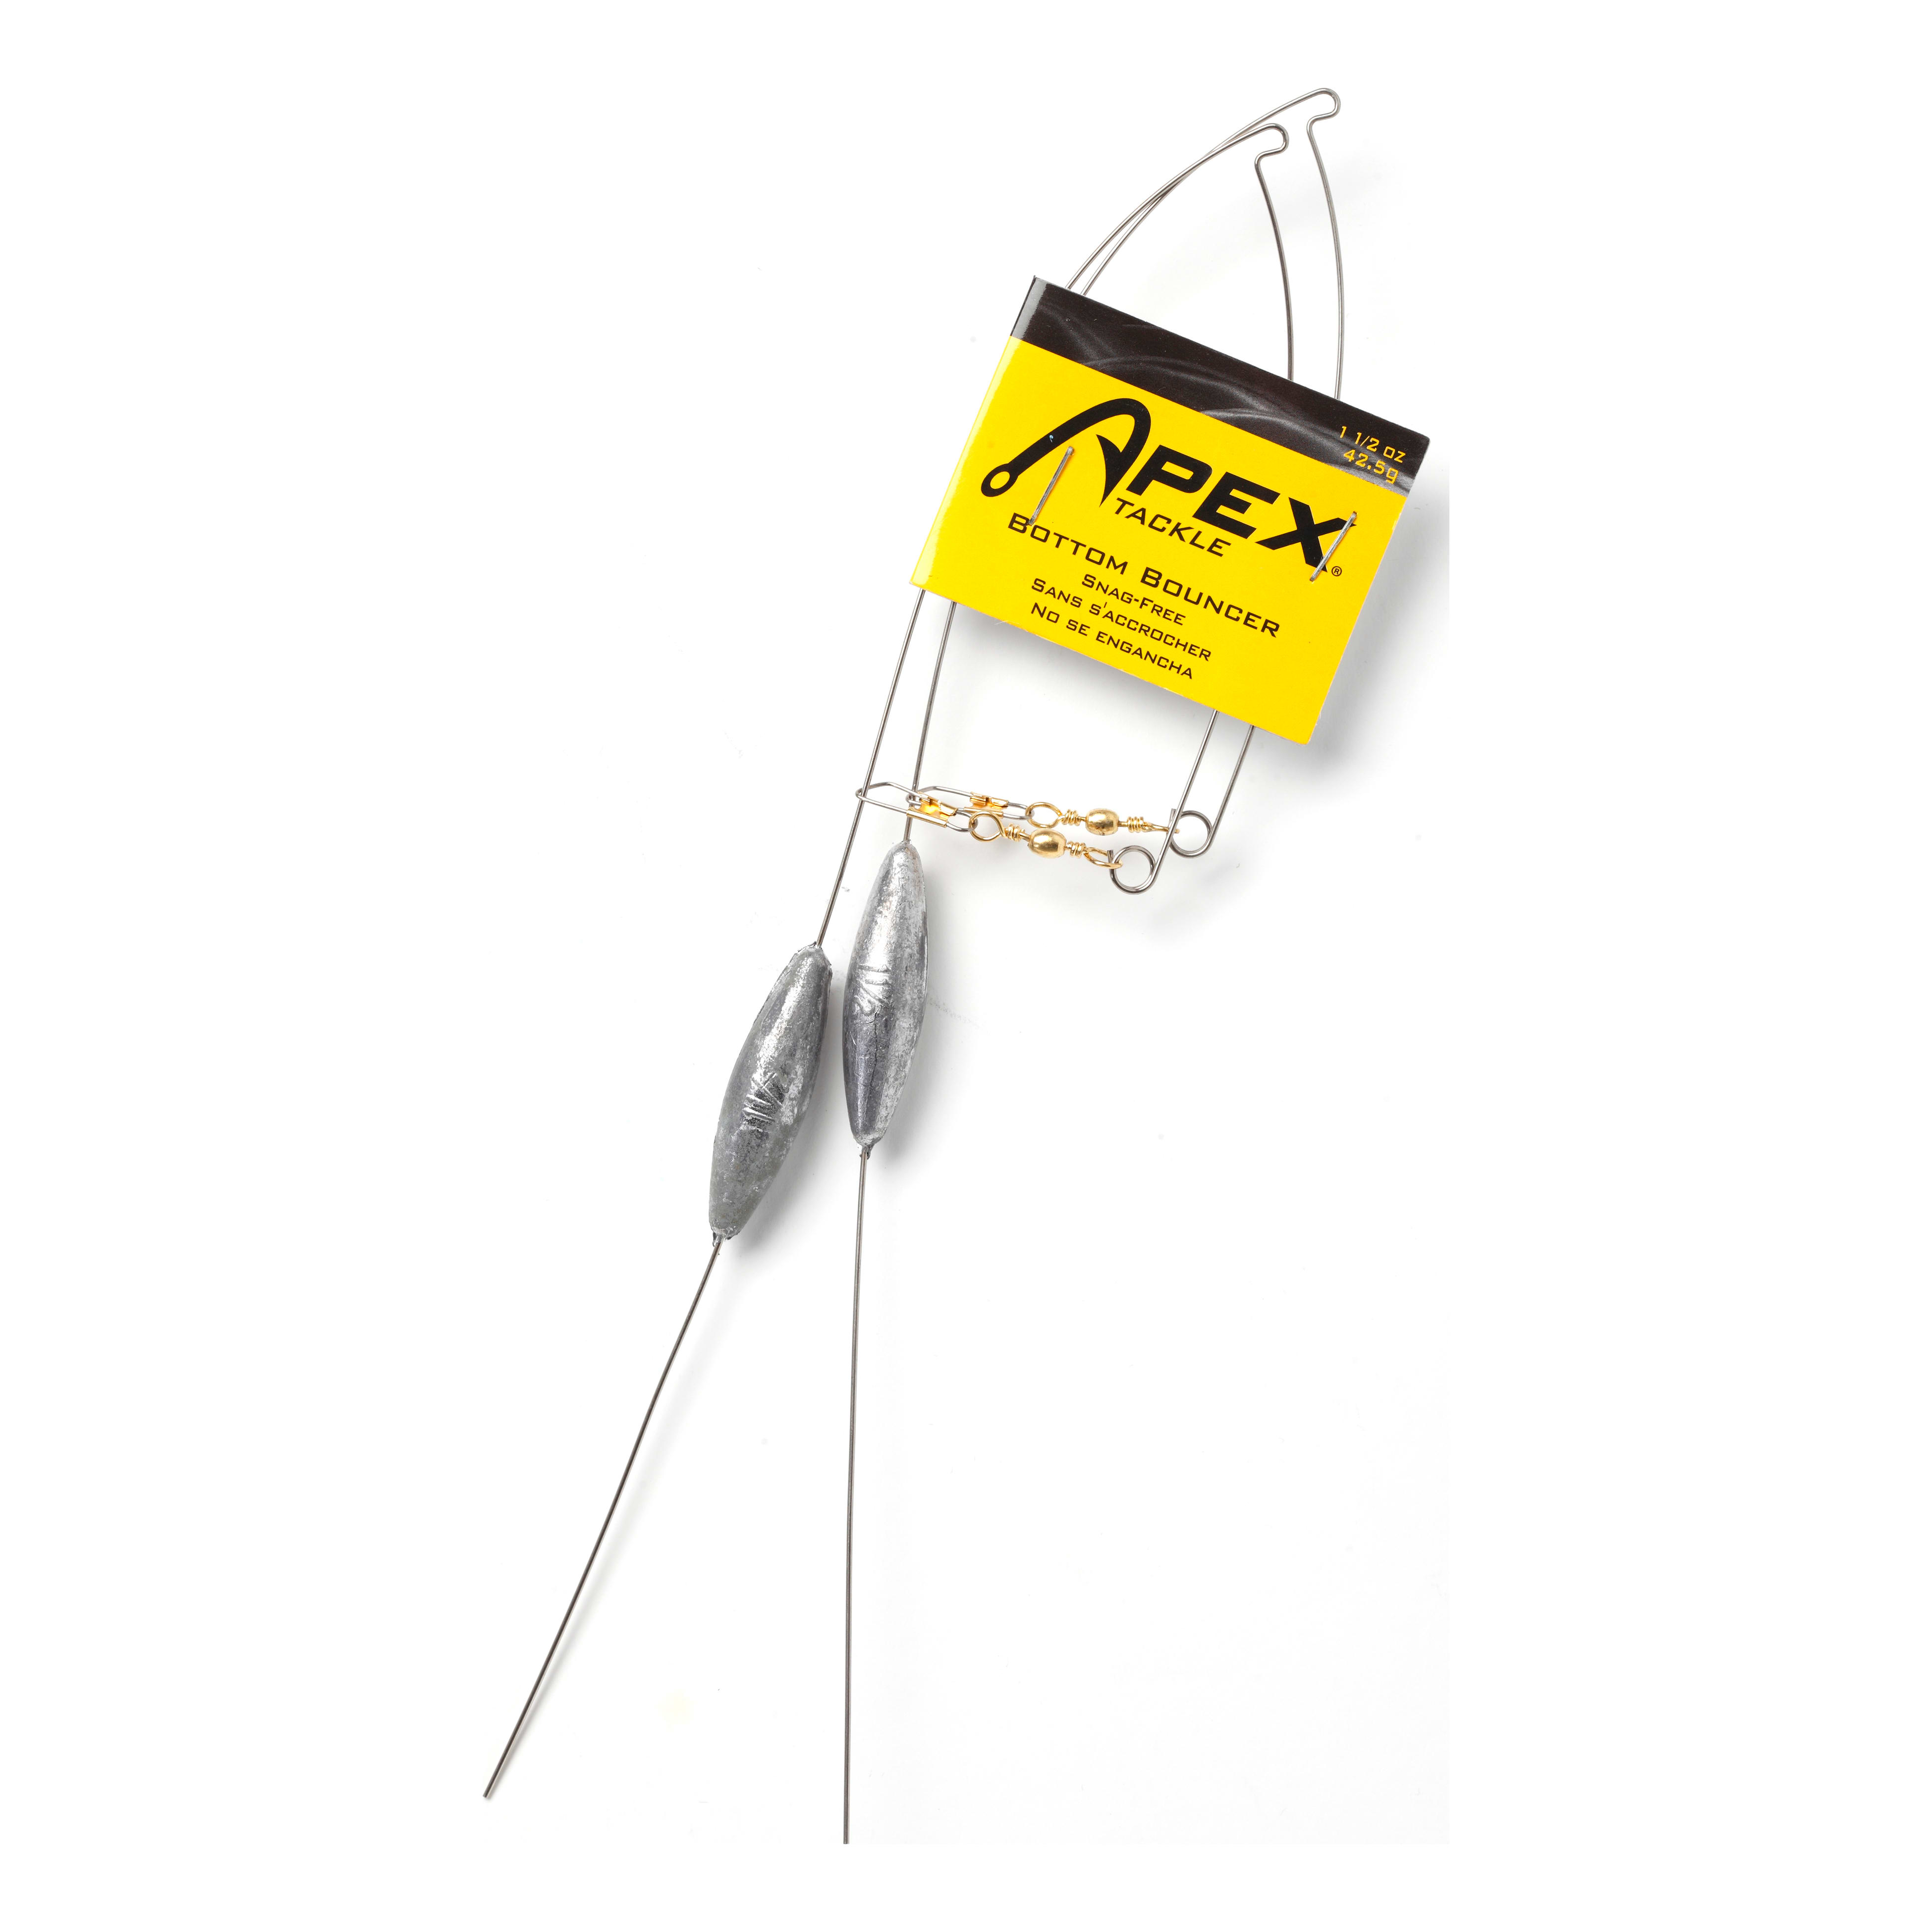 Apex Tackle® Unpainted Bottom Bouncers